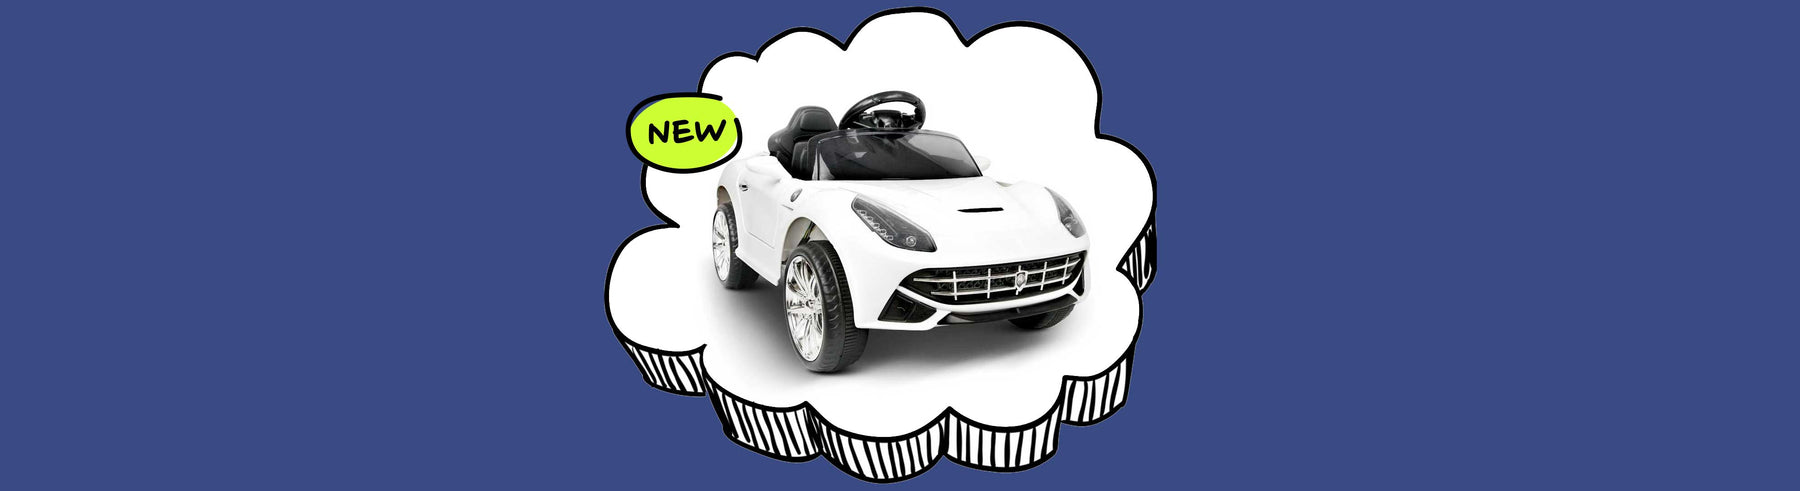 Ferrari F12 Inspired Kids Ride on Car with Remote Control